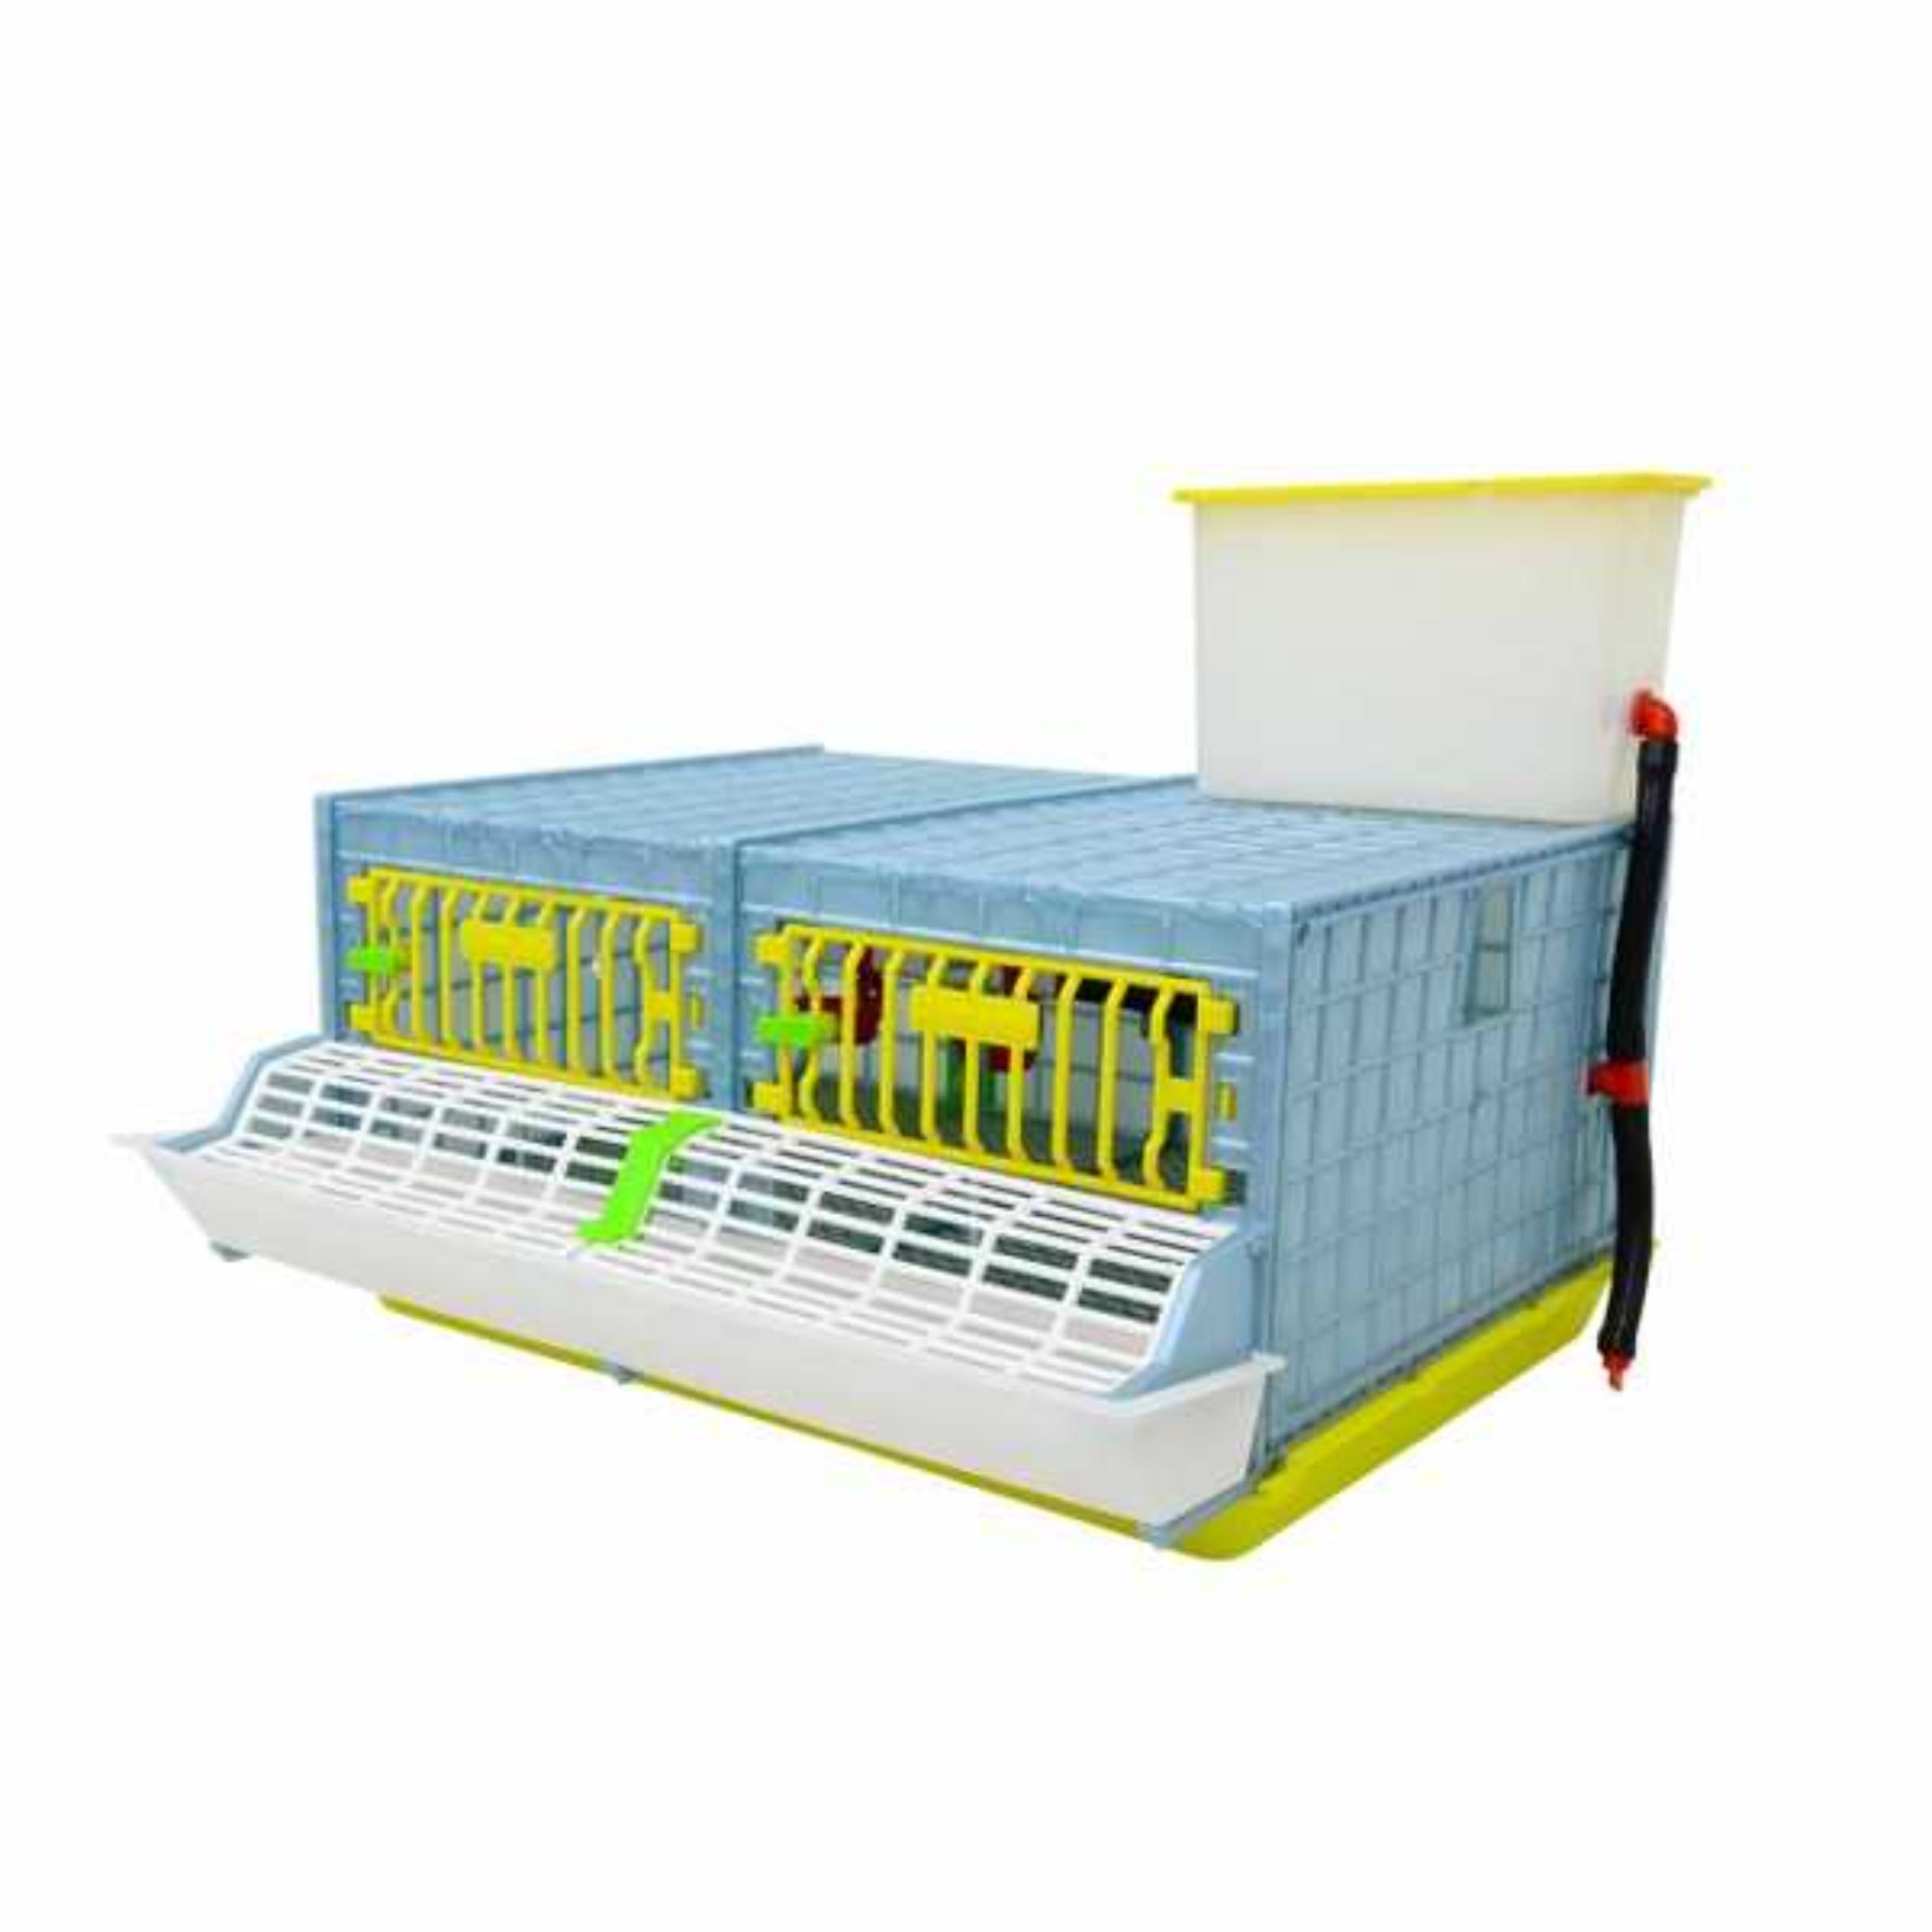 Hatching Time Cimuka GL25 9.5" Grow out Pen 1 section visible with front wall, door feeding trough visible and water reservoir tank on top of grow out pen.